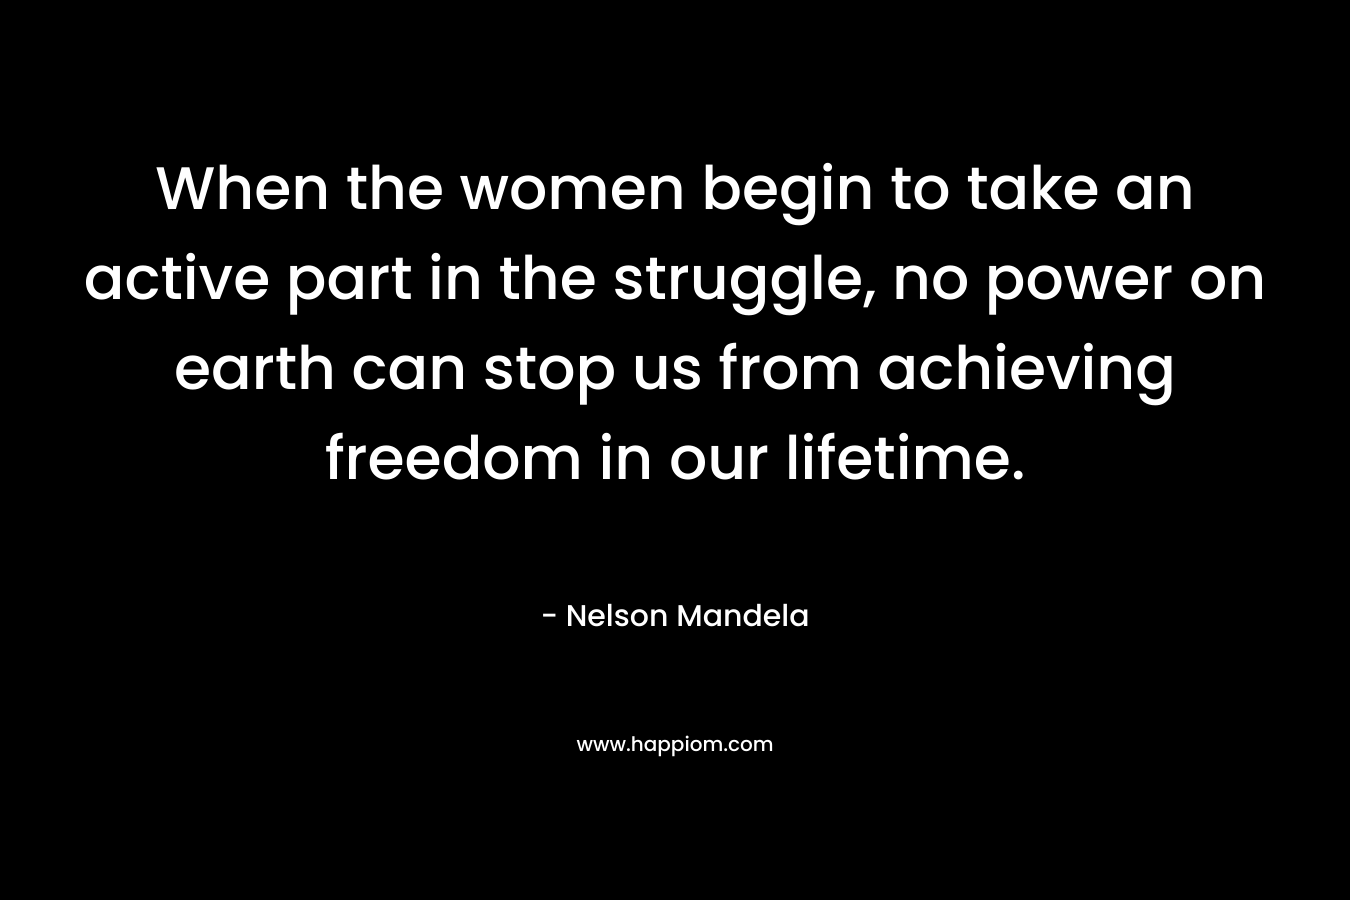 When the women begin to take an active part in the struggle, no power on earth can stop us from achieving freedom in our lifetime.